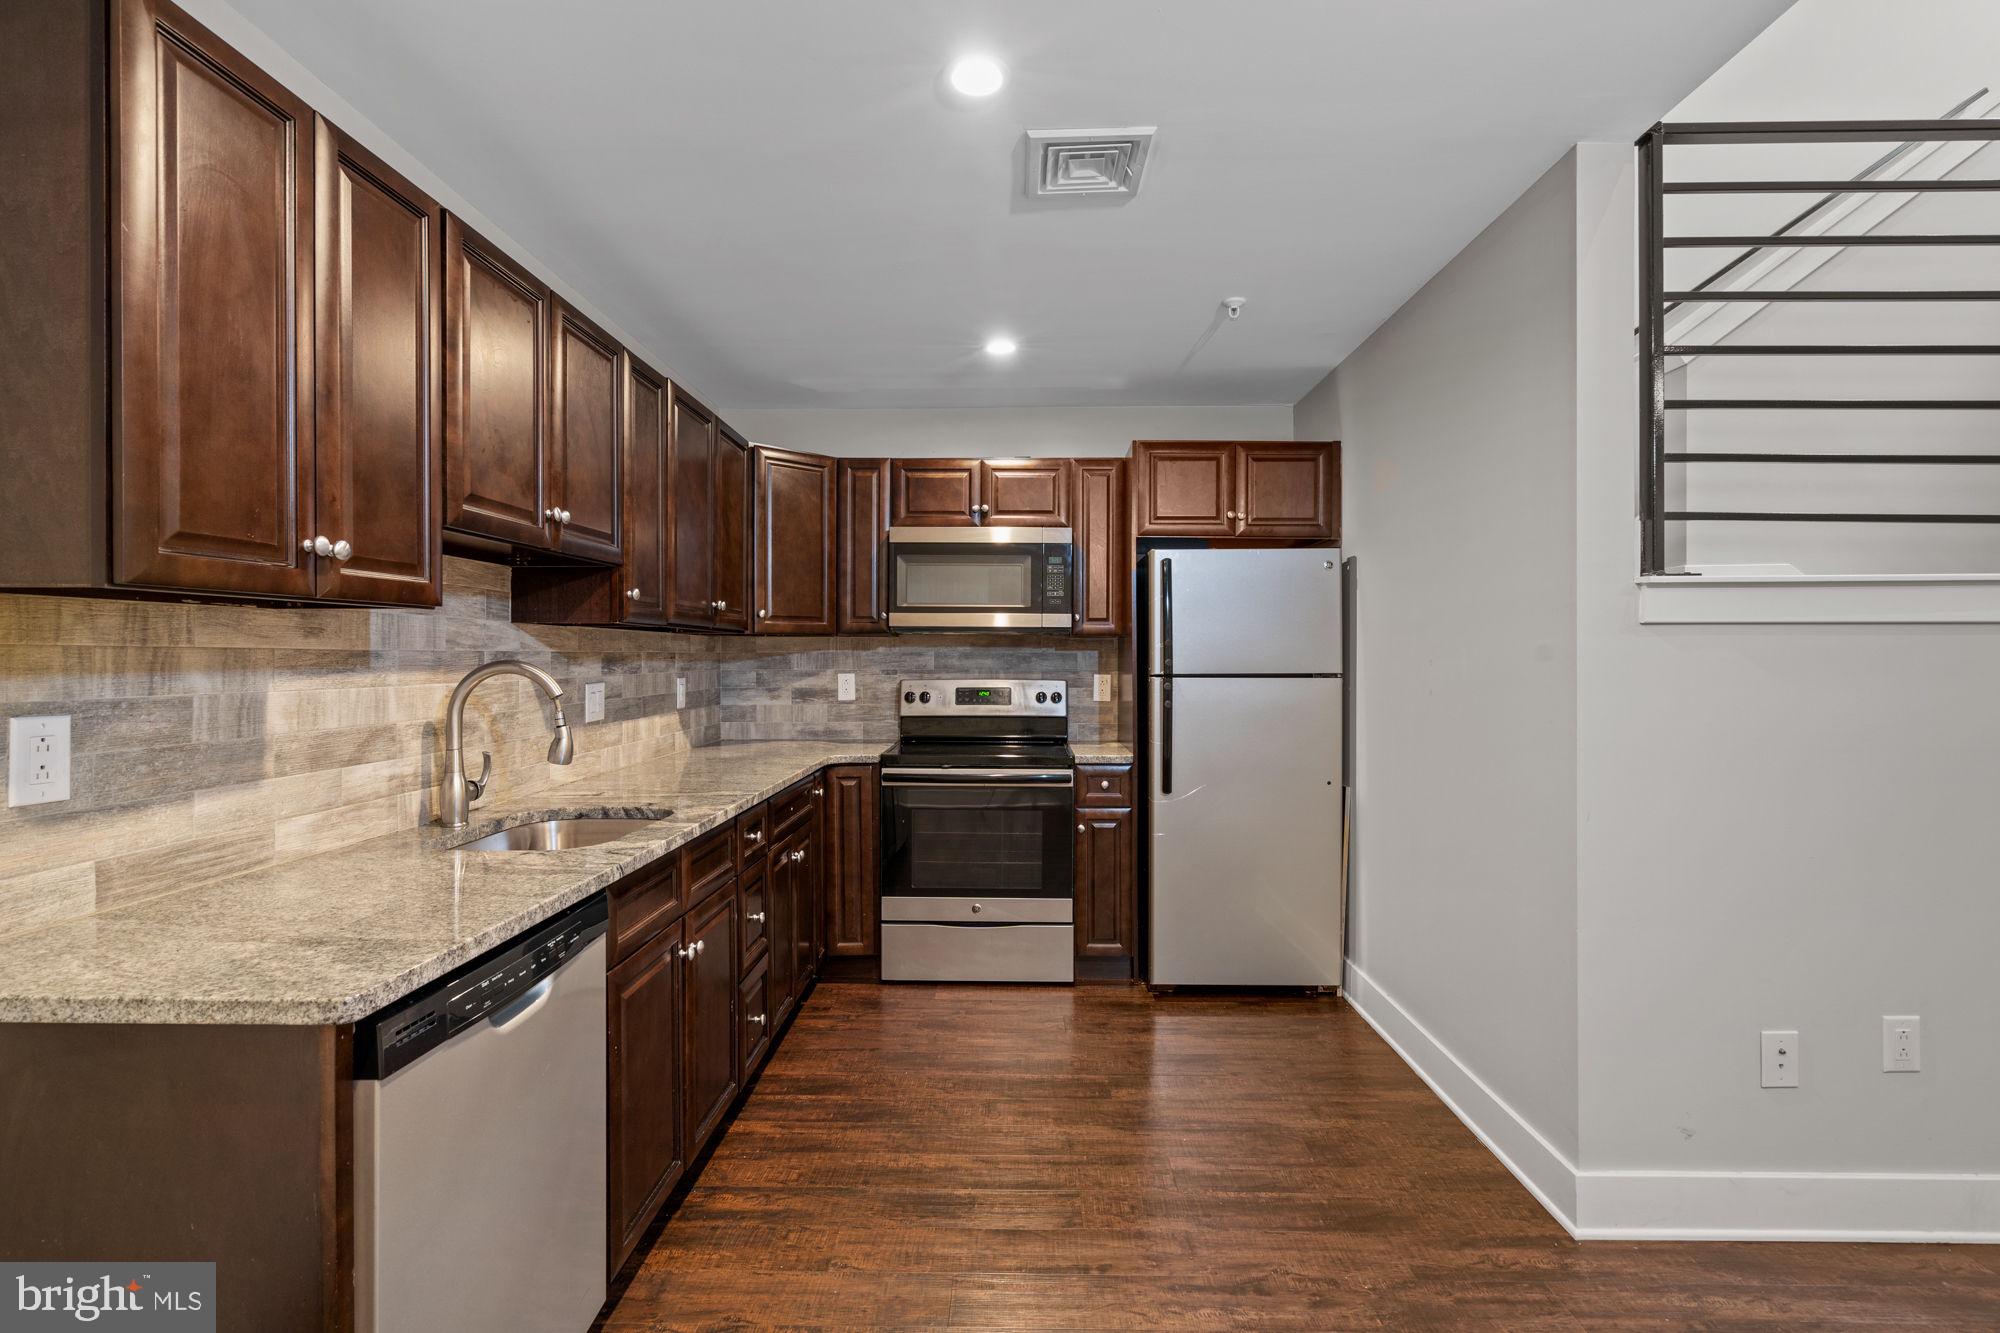 a kitchen with stainless steel appliances granite countertop a refrigerator a sink dishwasher a stove and a microwave oven on granite countertops